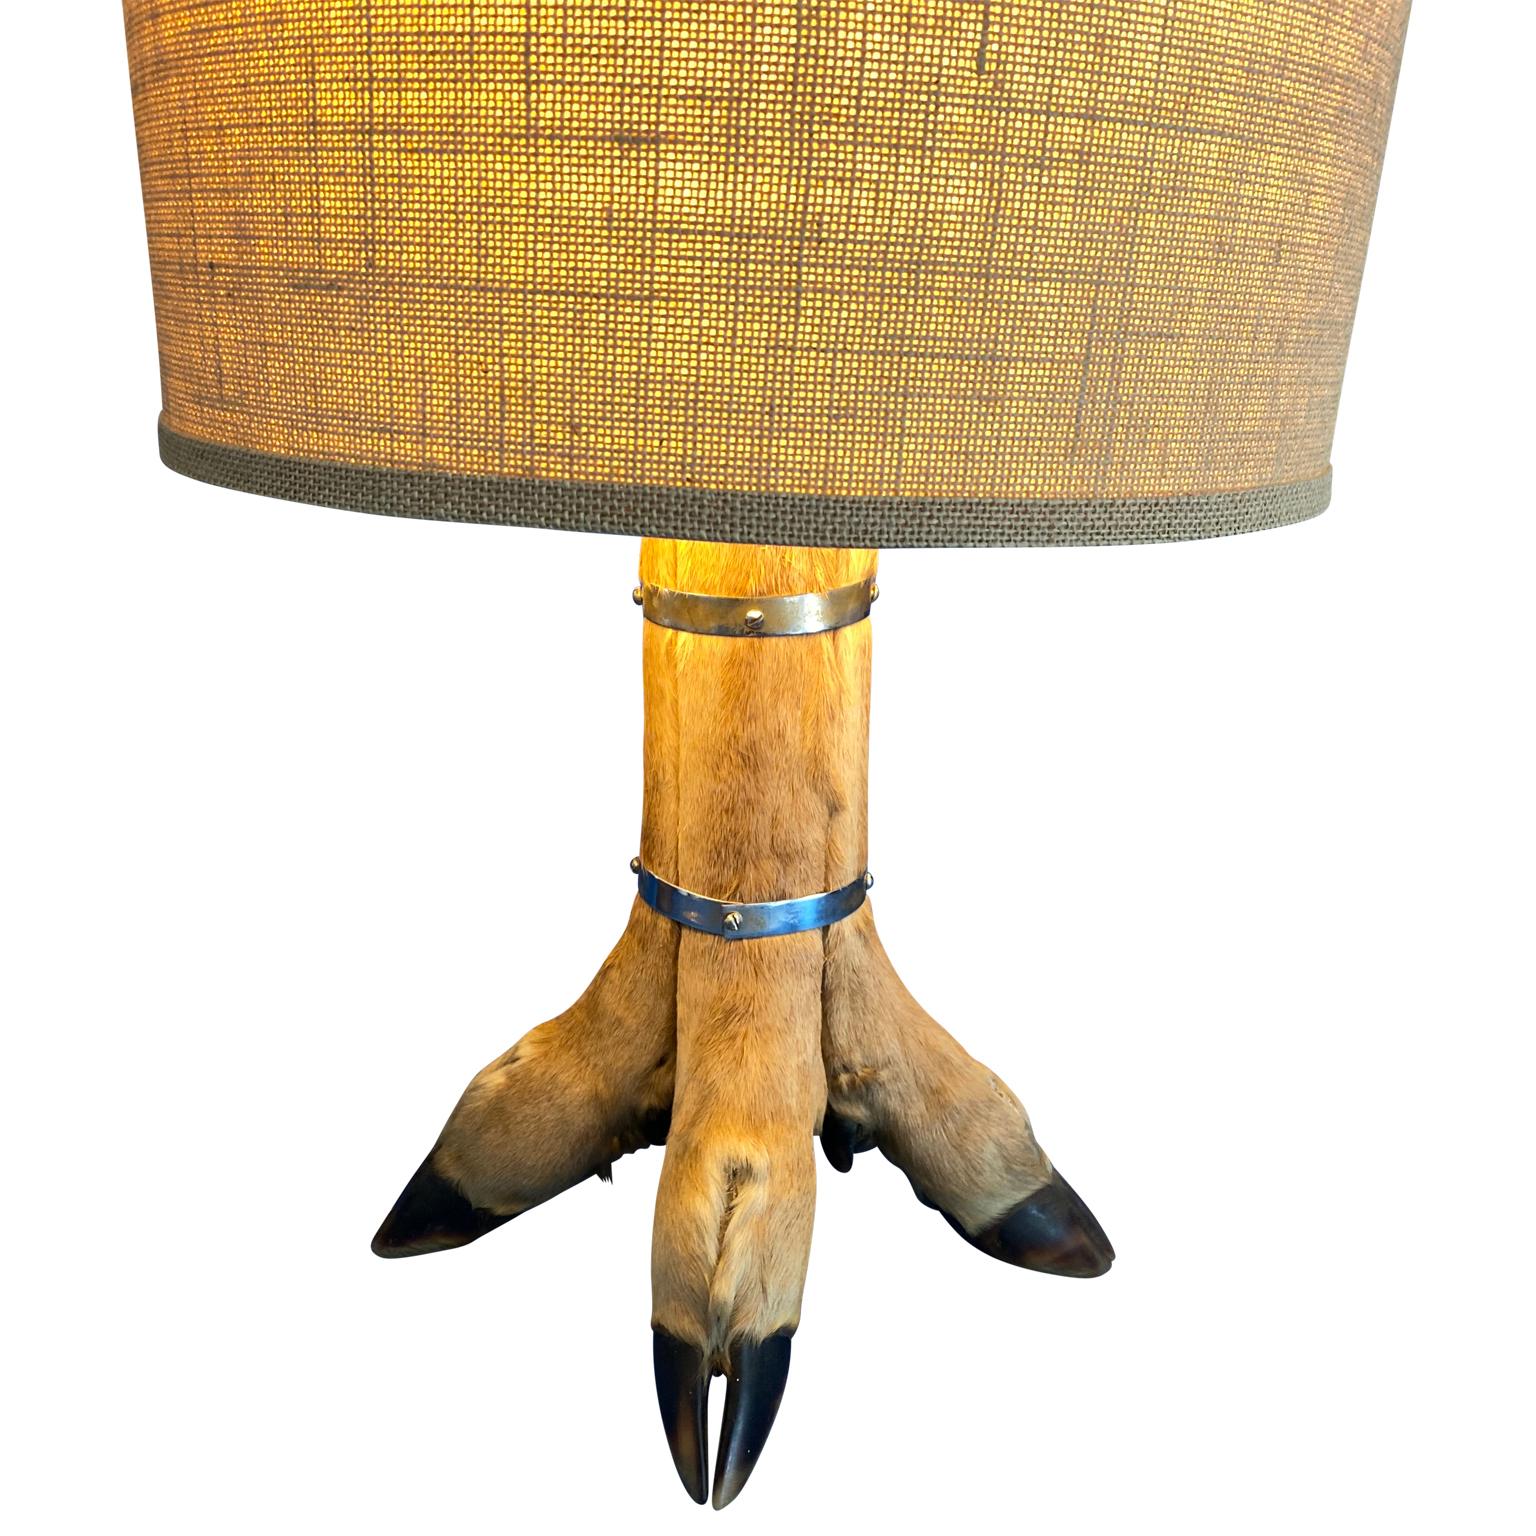 Table Lamp With 4 Tier Deer Hoof With Nickel Bands And Antler Finial im Zustand „Gut“ im Angebot in Haddonfield, NJ